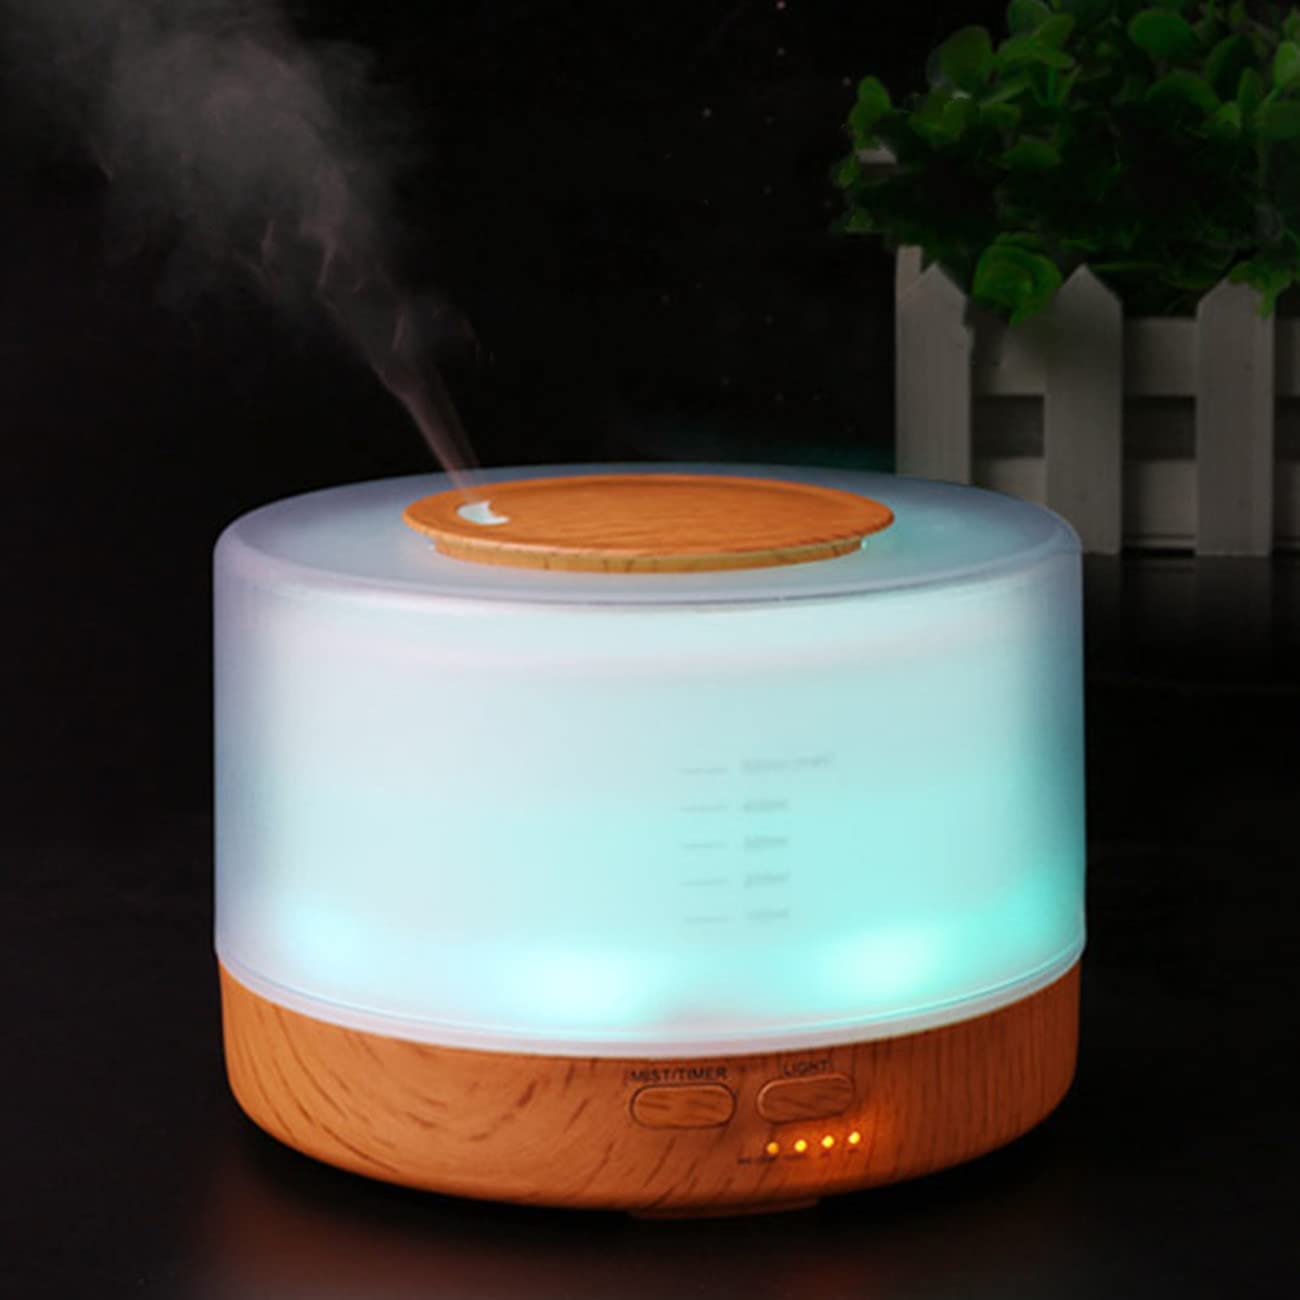 SKY-TOUCH Essential Oil Aroma Diffuser 700ml, Upgraded Aromatherapy Diffuser 7 Color Lights, Cool Mist Humidifier with Auto Shut-off Function, Diffuser for Home Bedroom Office موزع زيوت عطرية علاجية مطور سعة 700  مل، مرطب رذاذ بارد سكاي-تاتش، اصفر